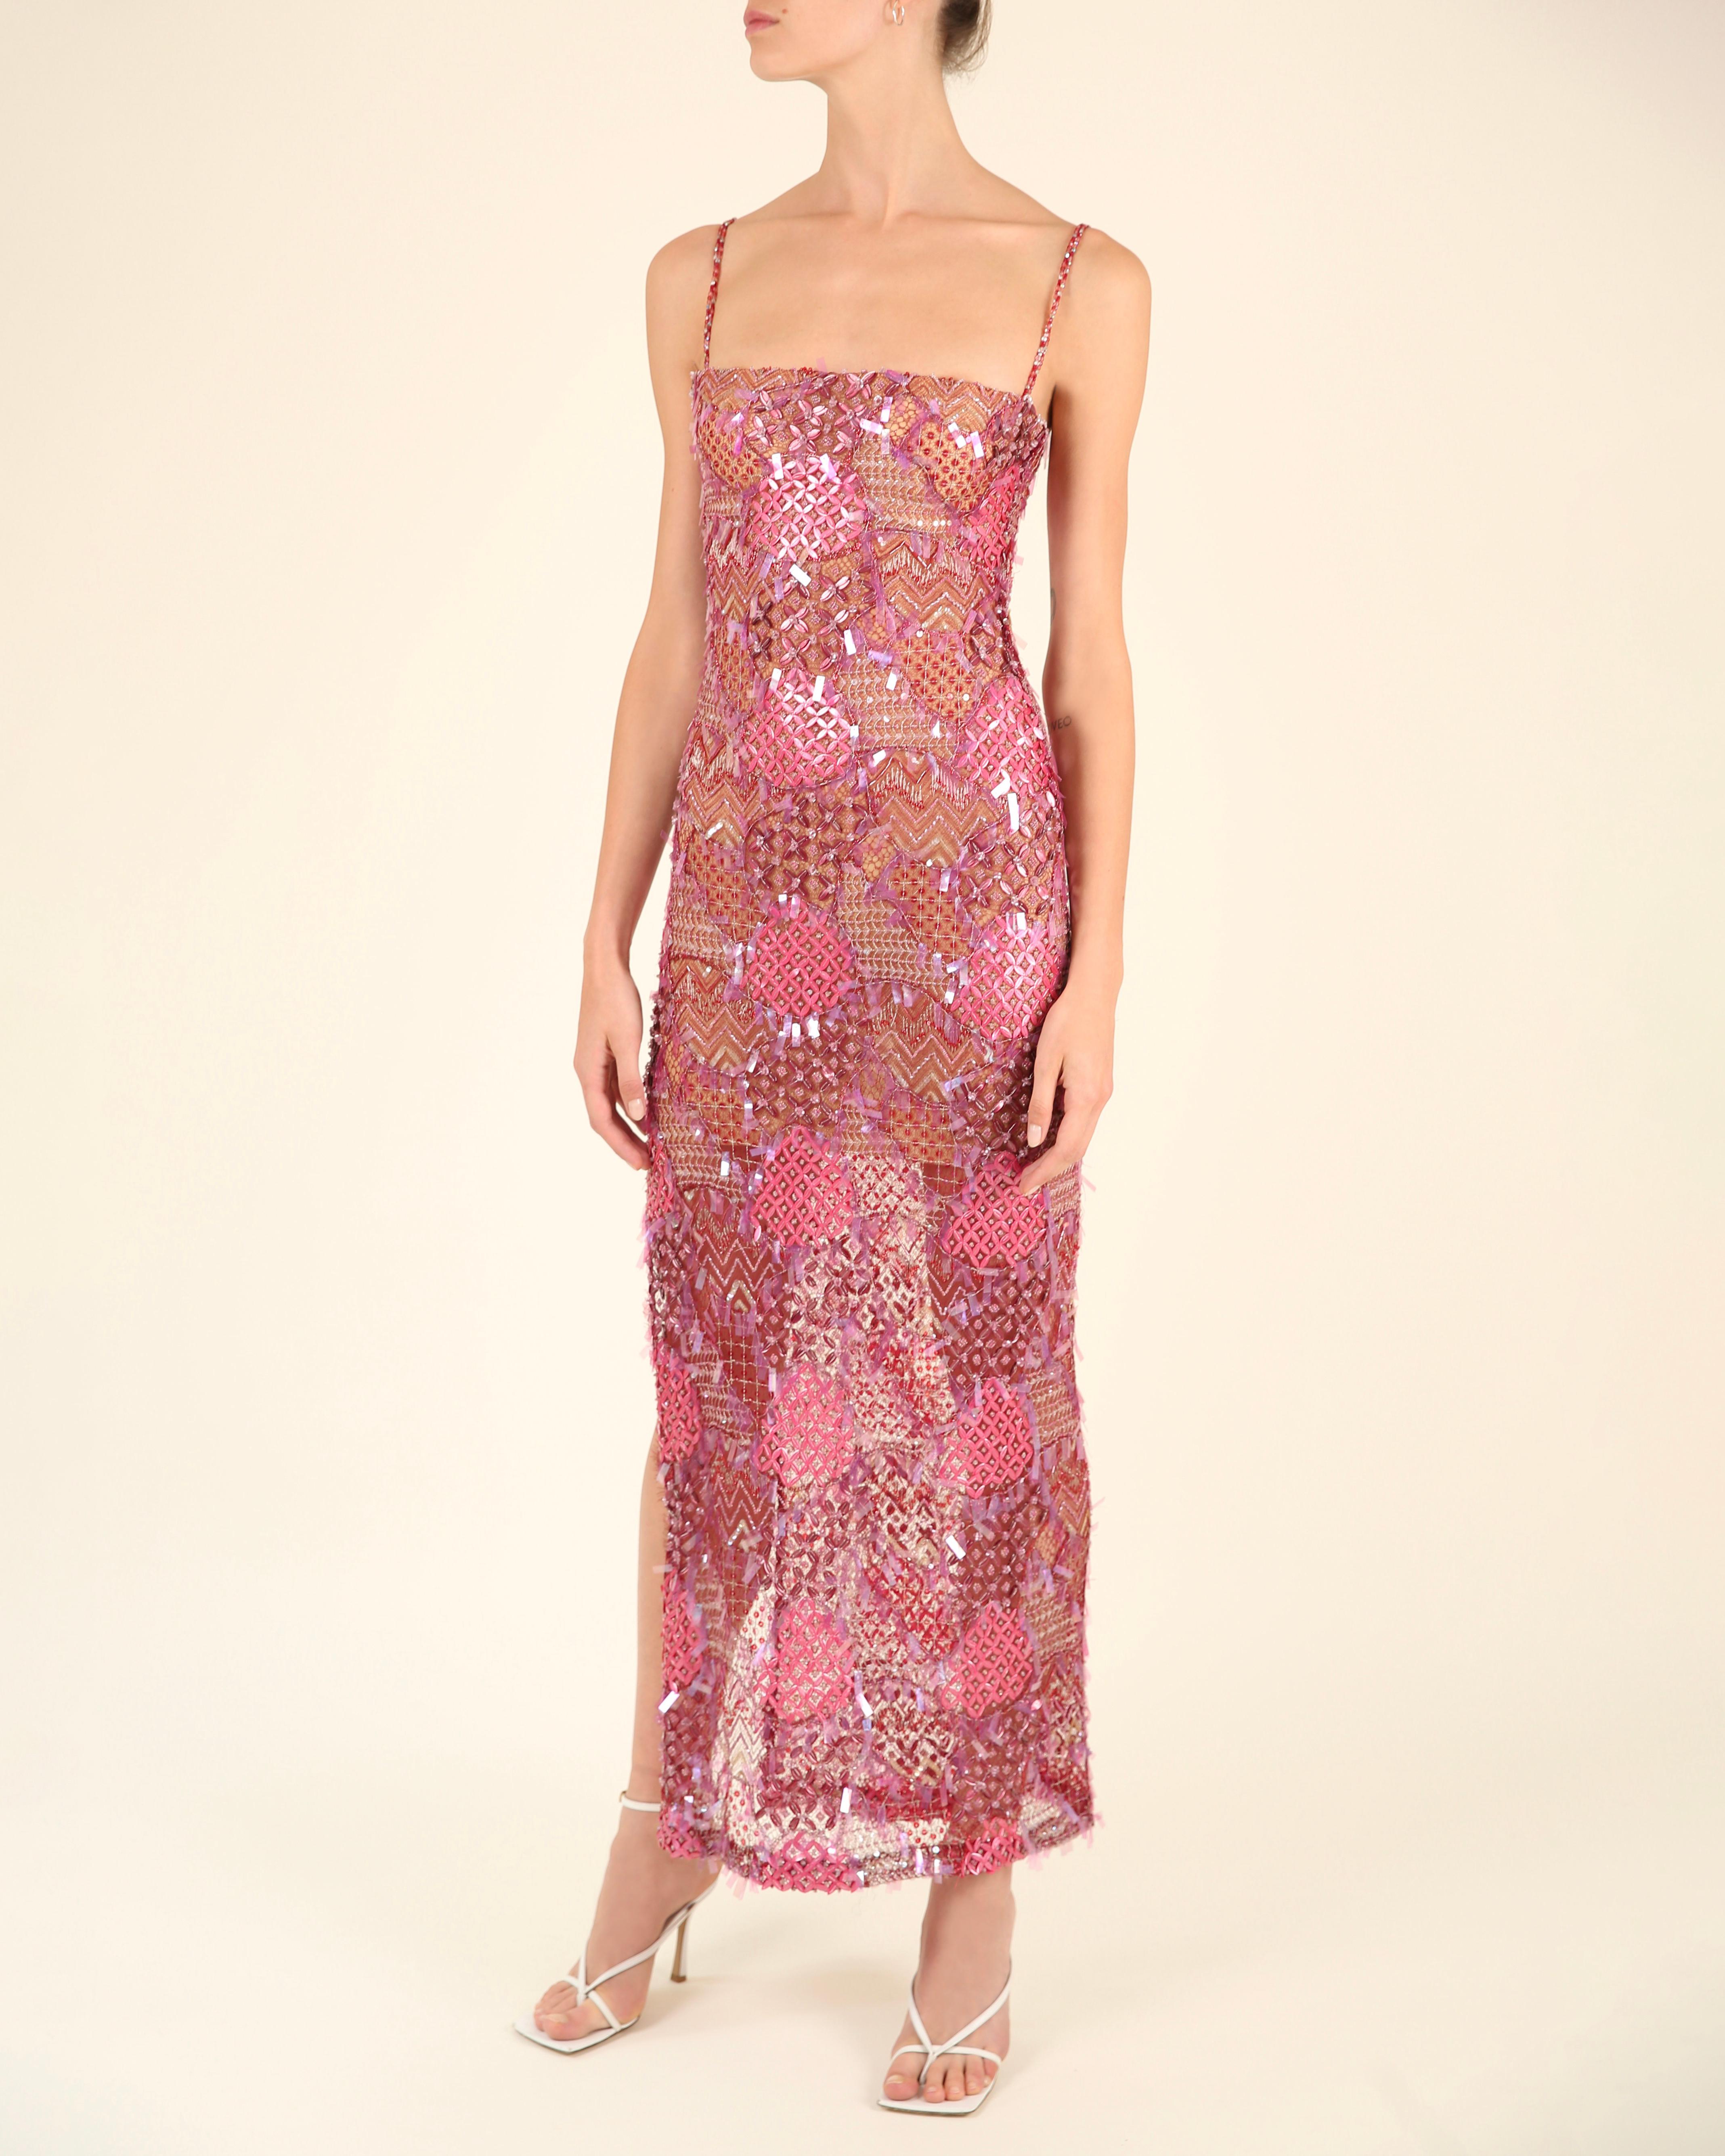 Loris Azzaro couture pink embellished sequin beaded sheer slit bustier dress XS For Sale 3